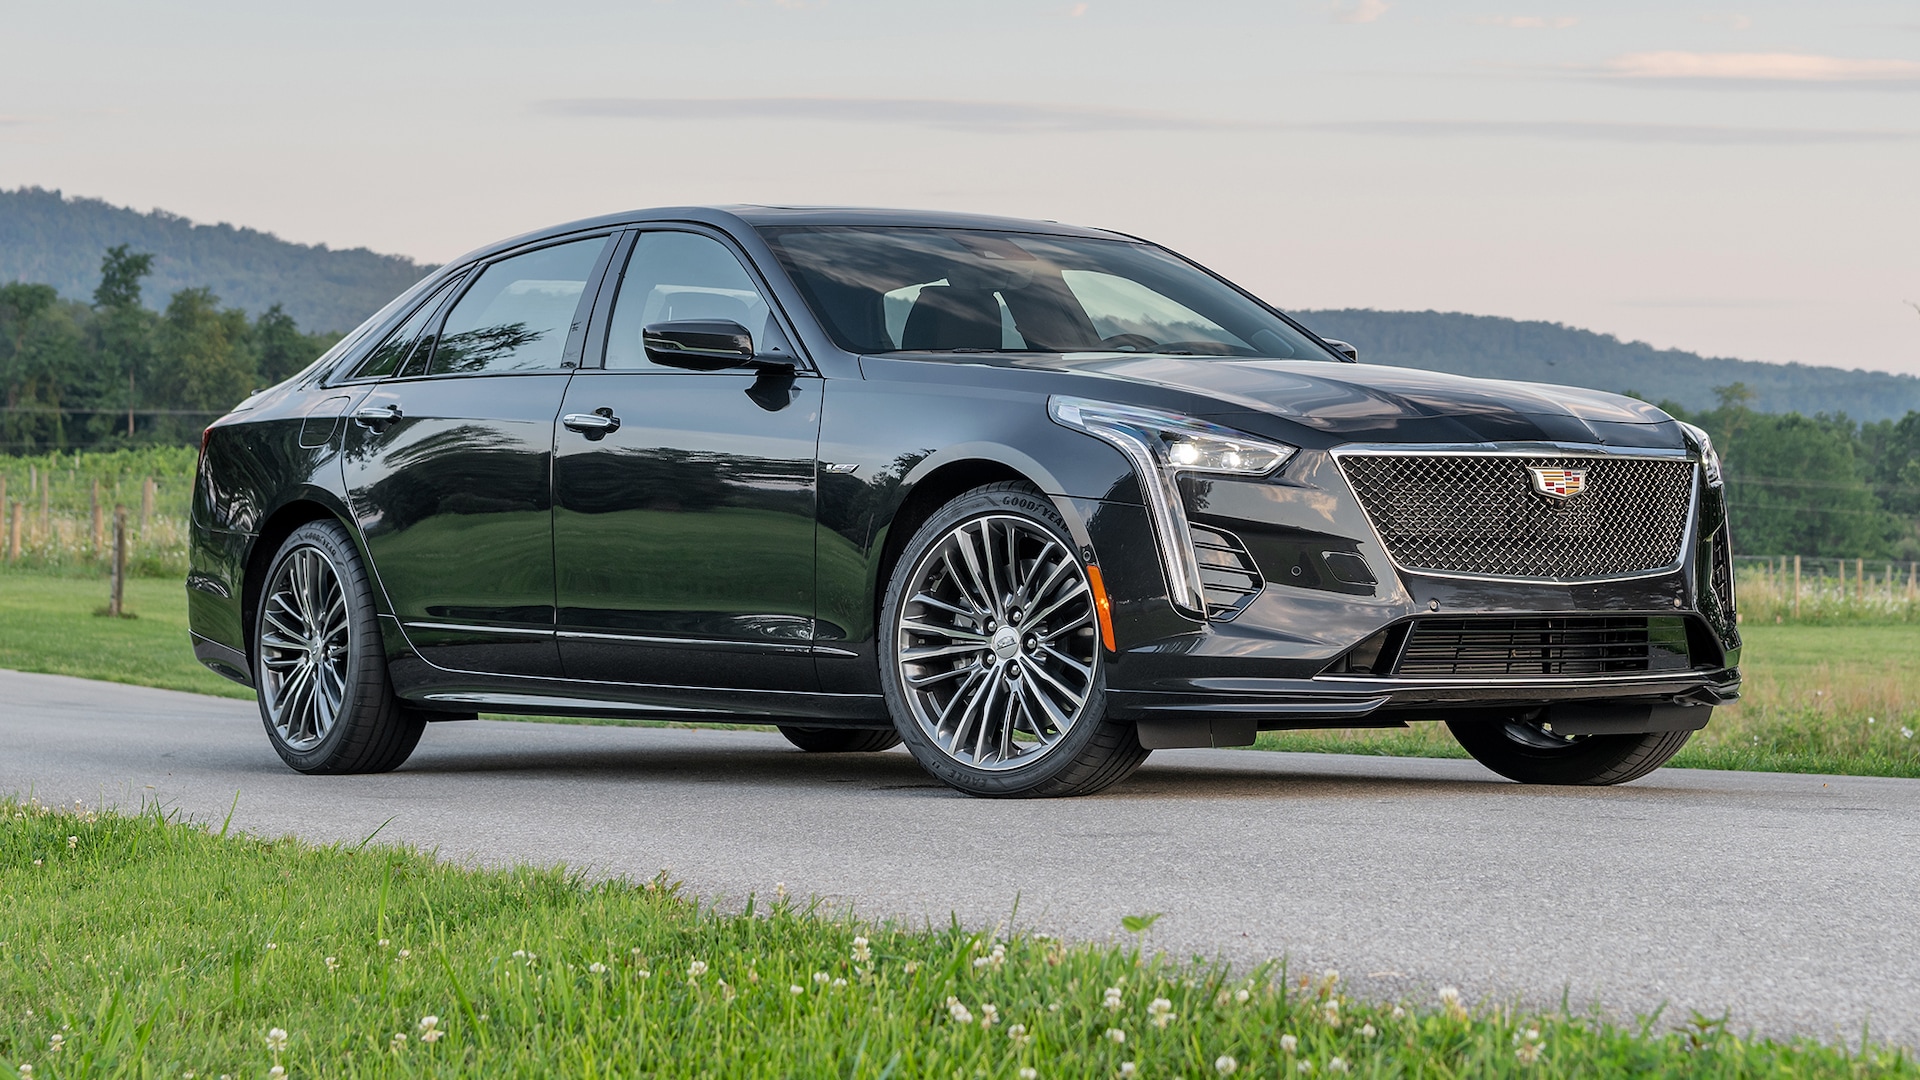 2019 Cadillac CT6-V Review: The 550-HP Blackwing V-8 Has Arrived